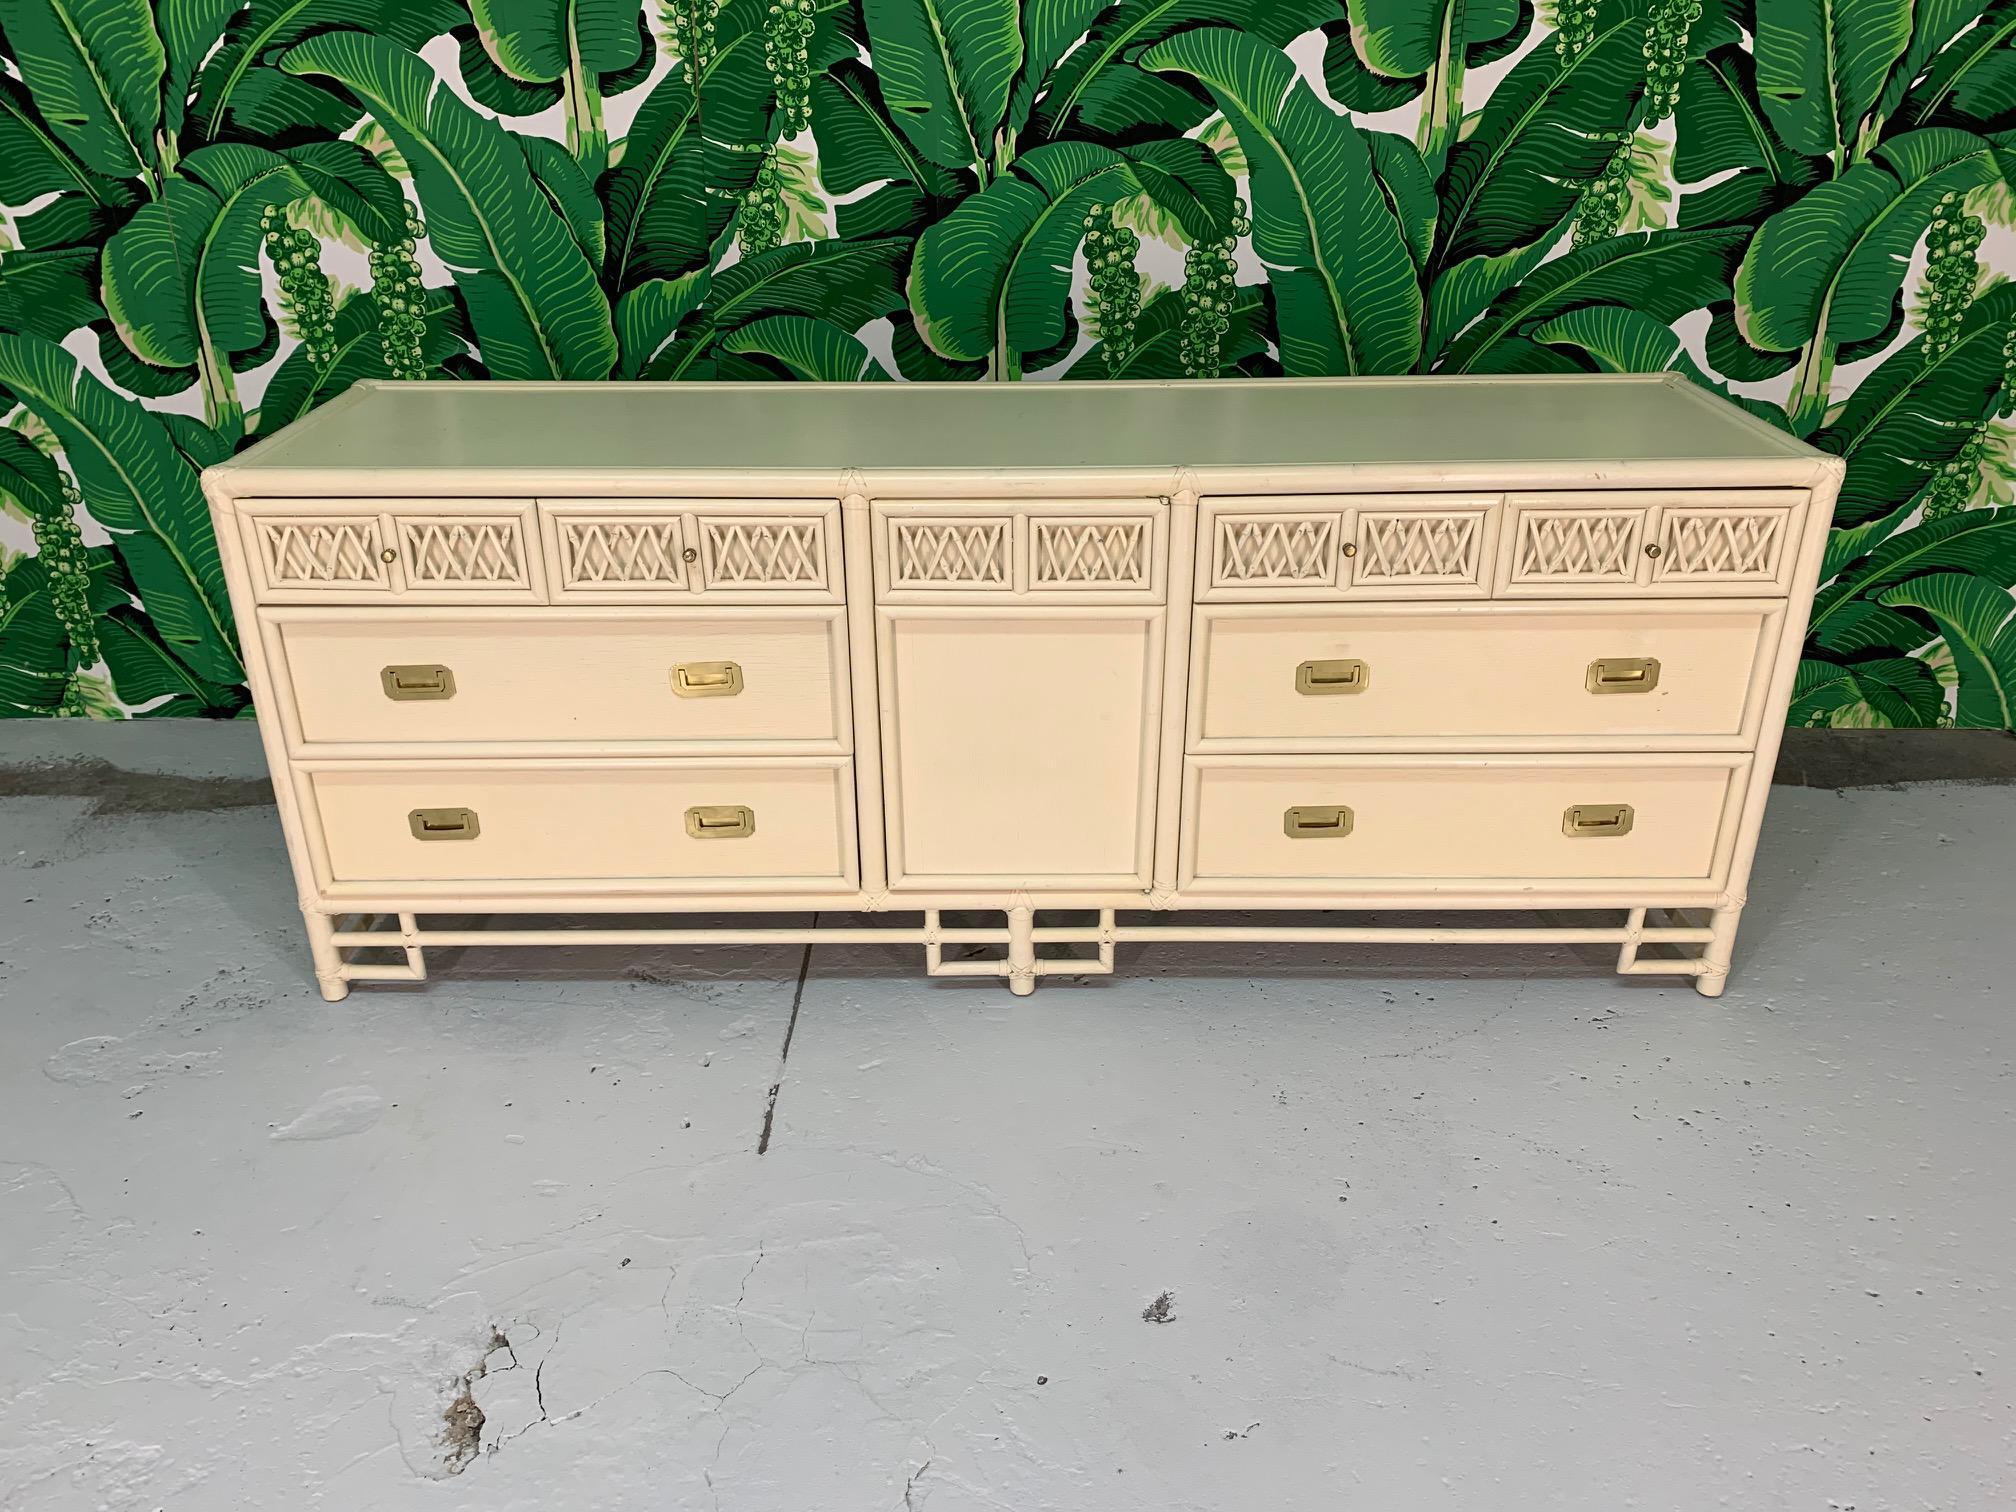 Asian chinoiserie style rattan dresser features lattice pattern drawer fronts and brass hardware. Cream colored finish. Good vintage condition with abrasions and marks to finish, structurally sound condition. Professional refinishing is available,